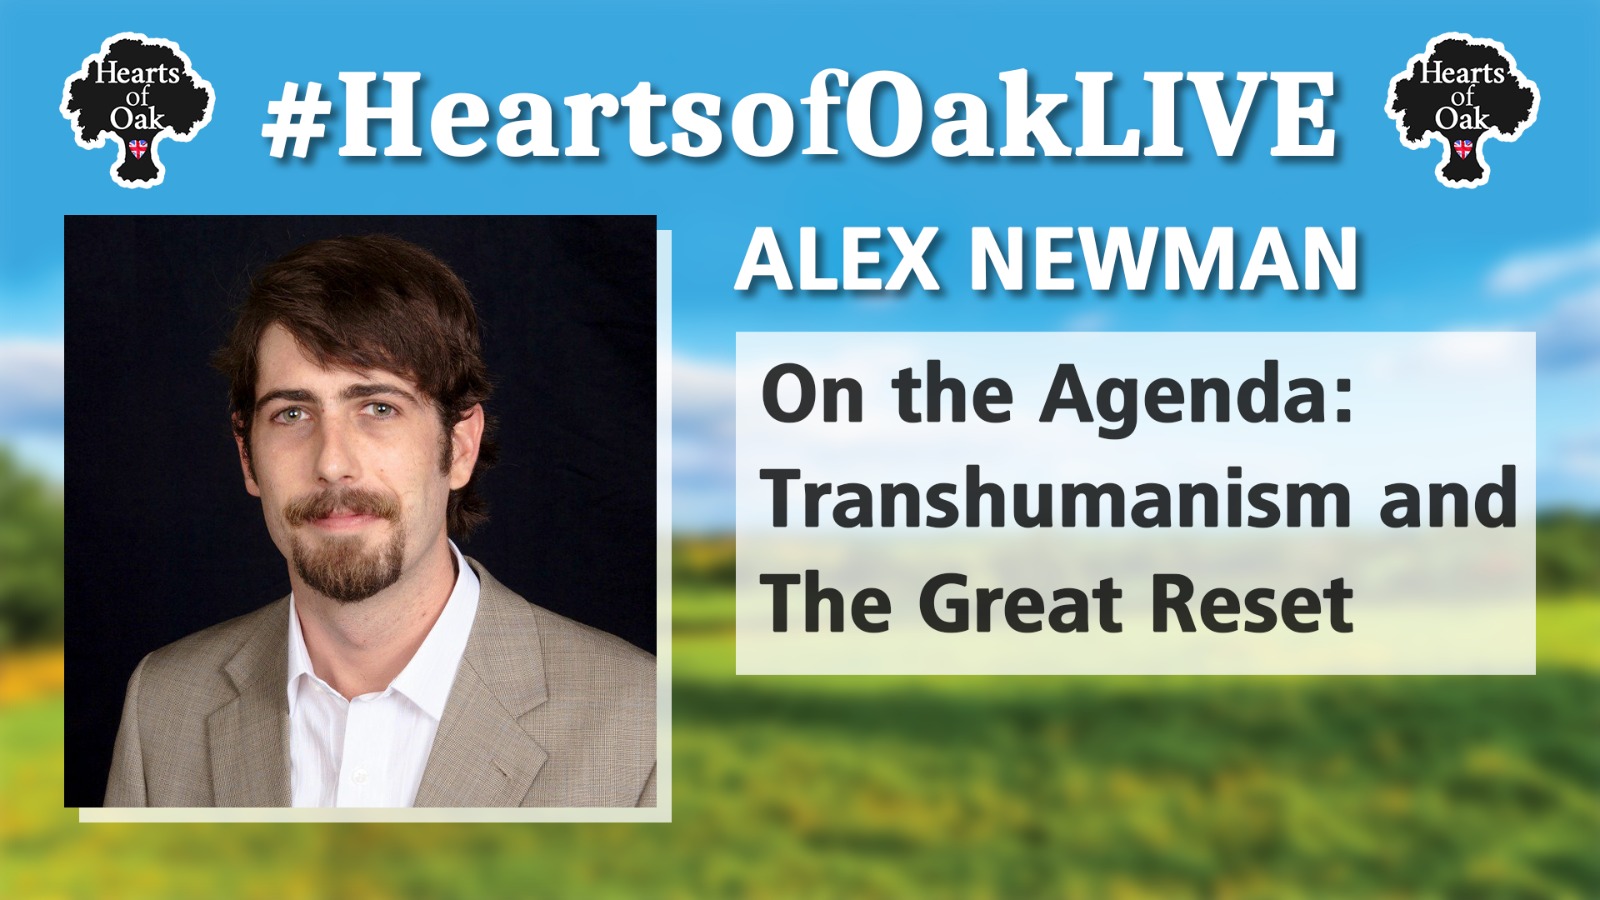 Alex Newman – On the Agenda: Transhumanism and The Great Reset